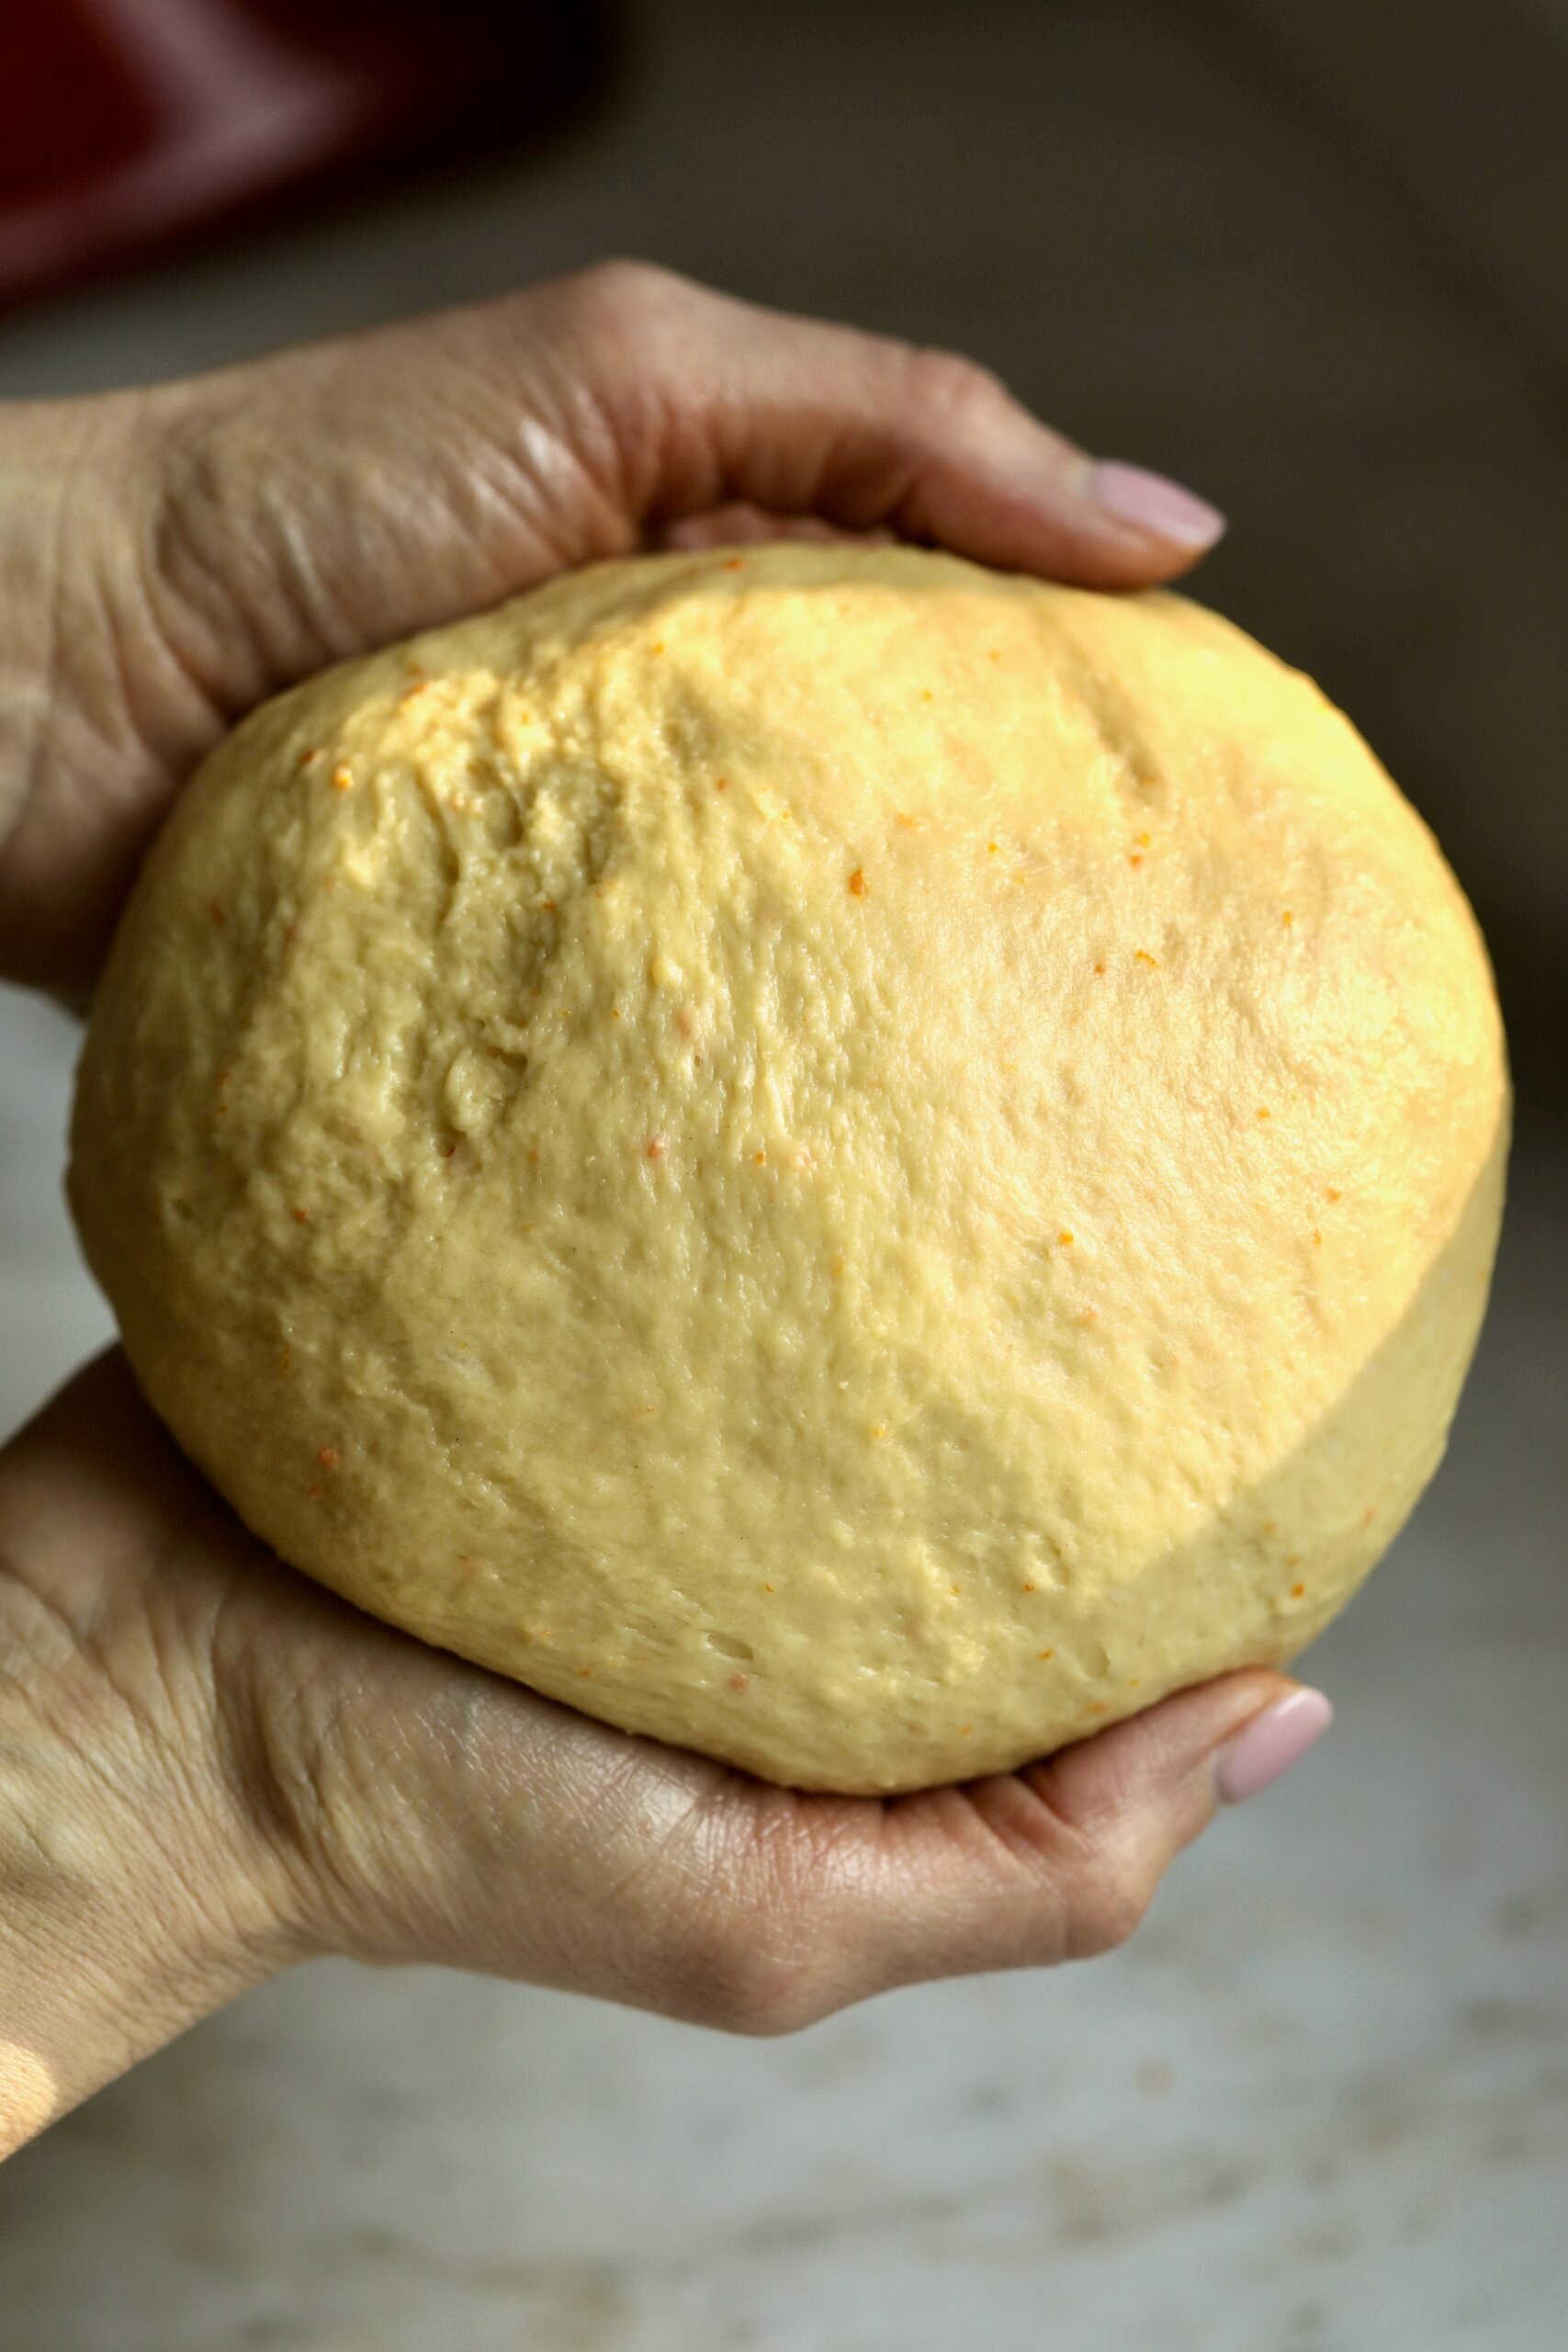 Process of making Bomboloni (how to make bomboloni recipe)- round dough ball ready to place into a greased bowl for first rise.